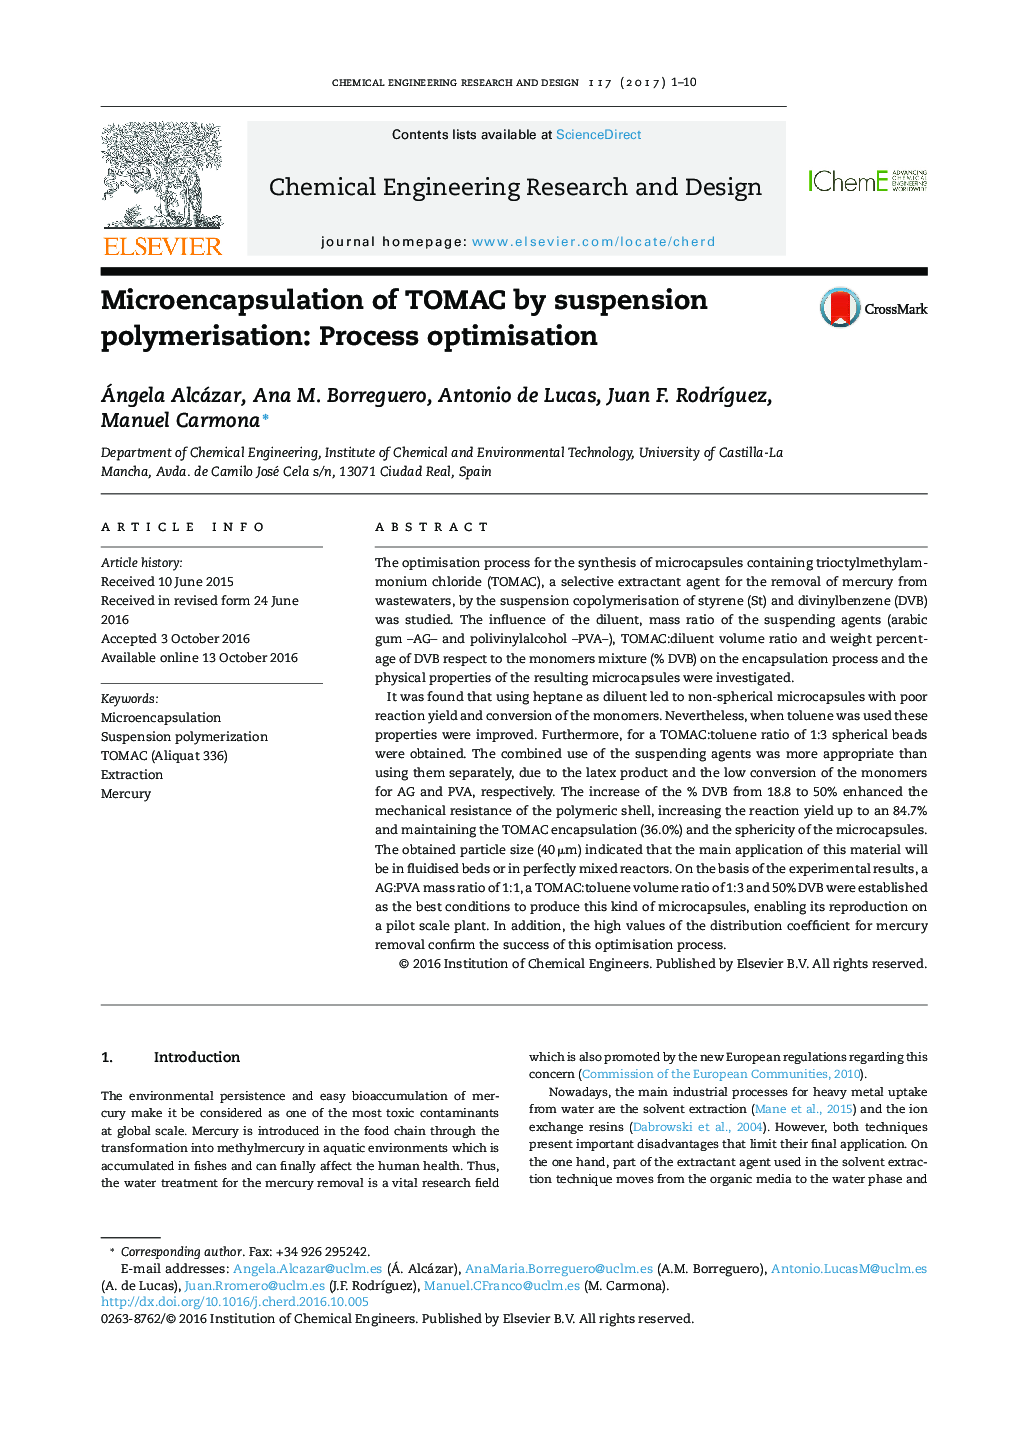 Microencapsulation of TOMAC by suspension polymerisation: Process optimisation